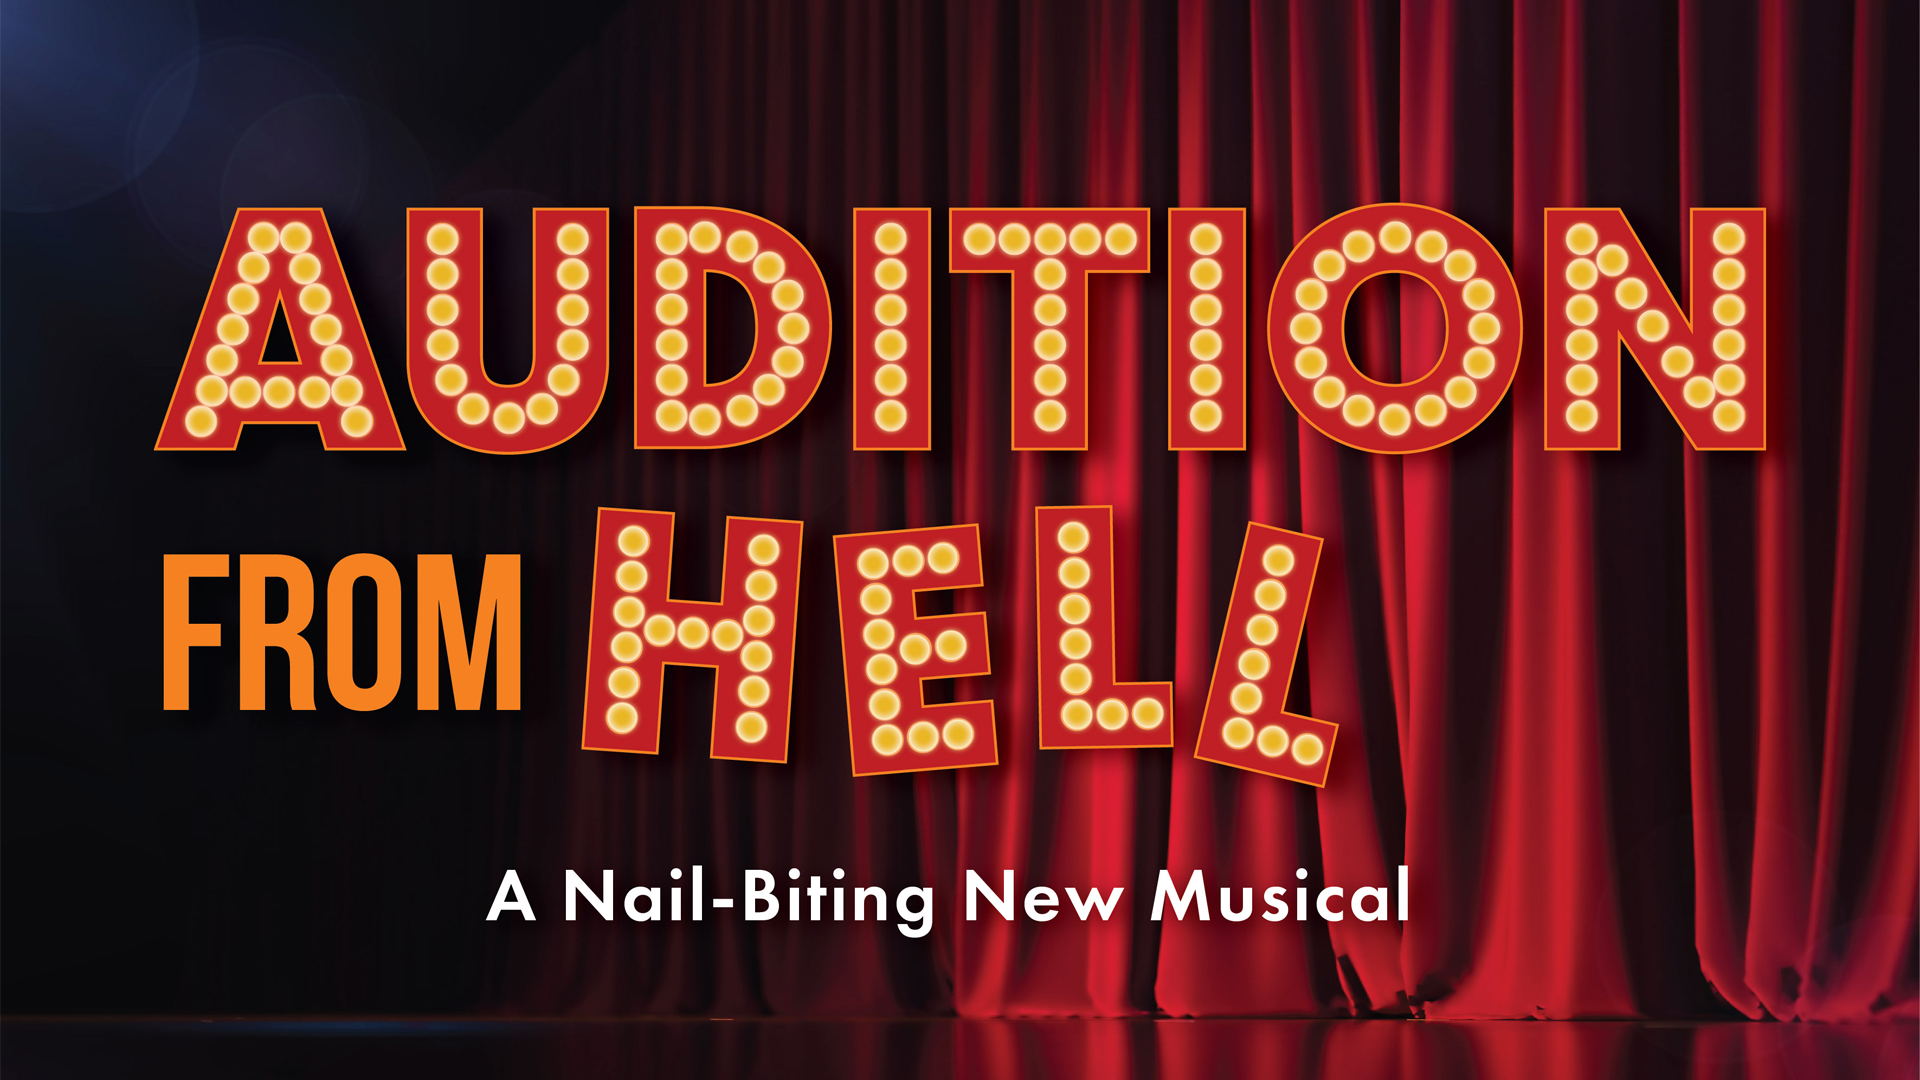 Audition From Hell - logo - 1920x1080